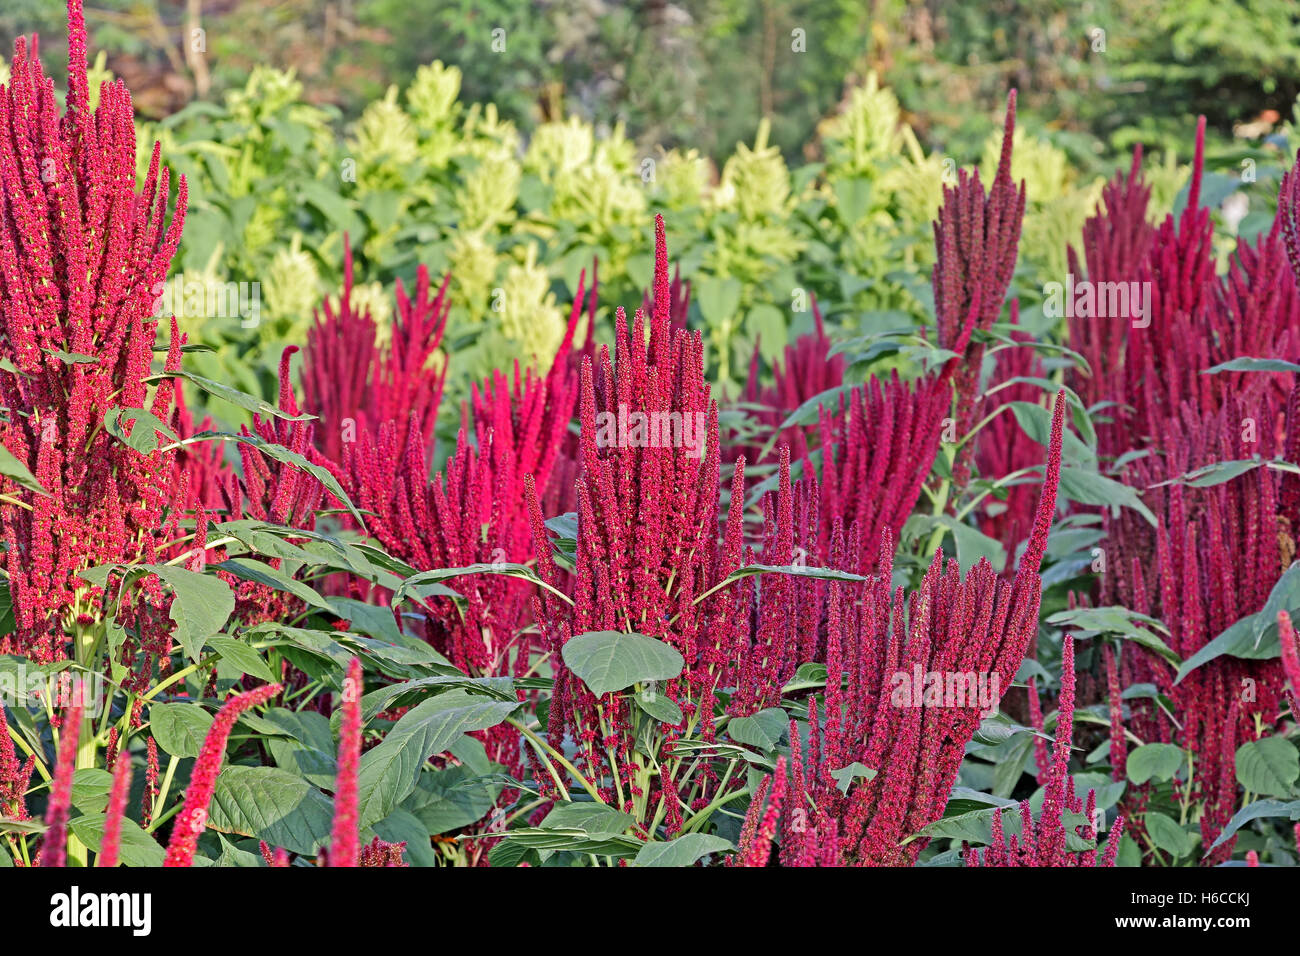 Indian red and green amaranth plants in field. Amaranth is cultivated as leaf vegetables, cereals and ornamental plants. Stock Photo